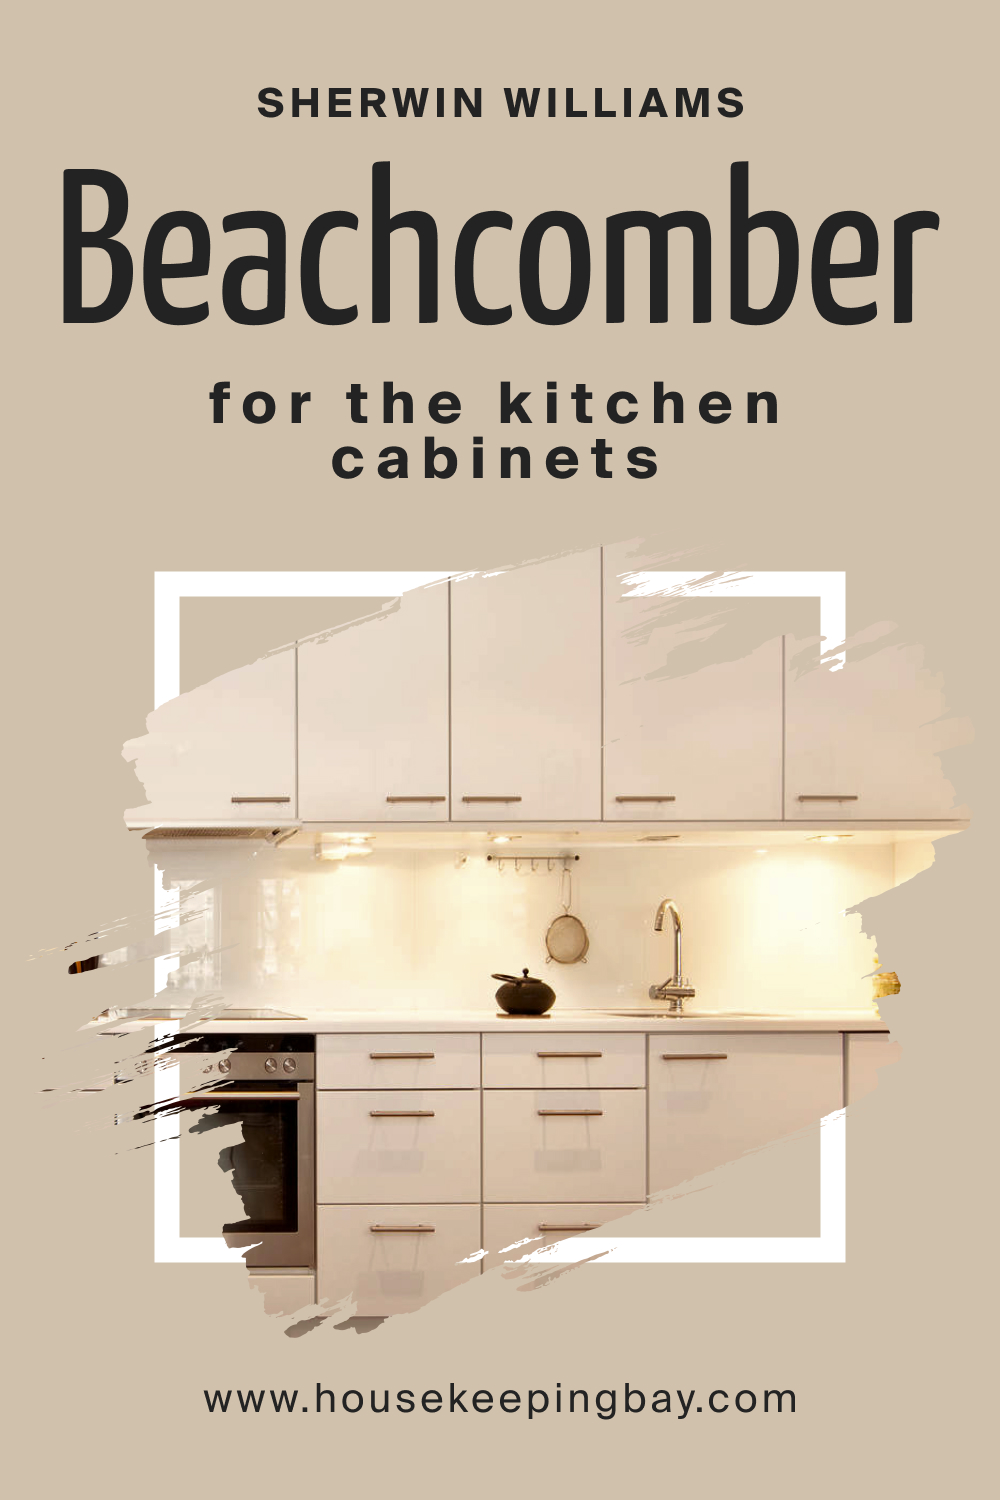 Sherwin Williams. SW 9617 Beachcomber For the Kitchen Cabinets